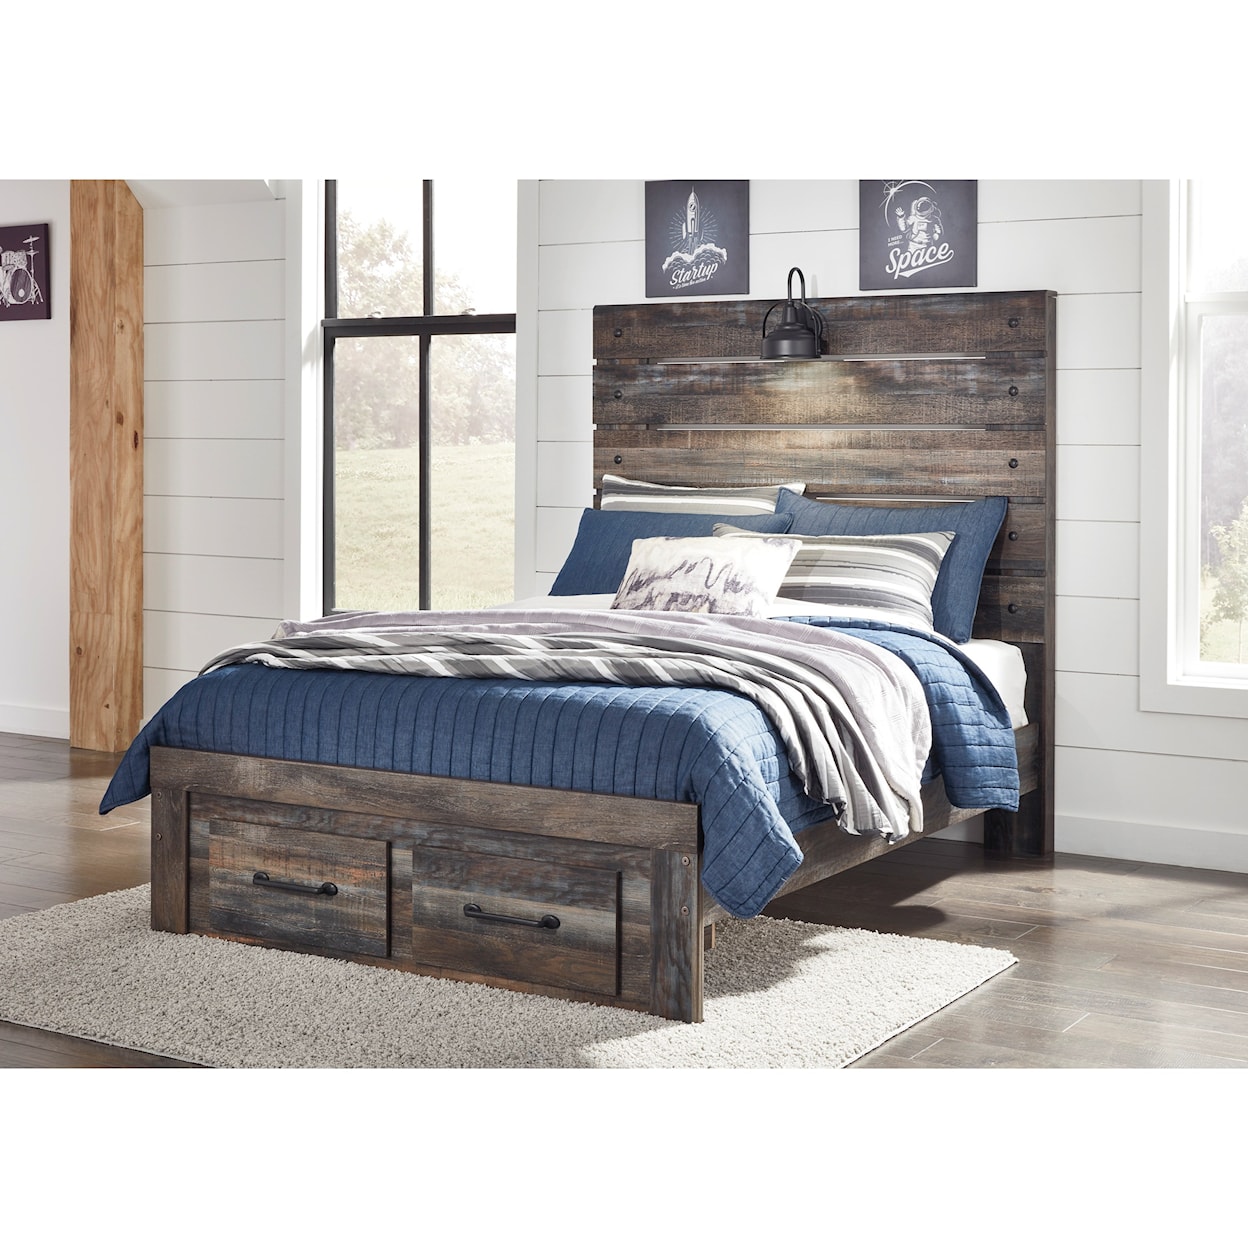 Signature Design by Ashley Furniture Drystan Full Panel Bed w/ Light & Footboard Drawers